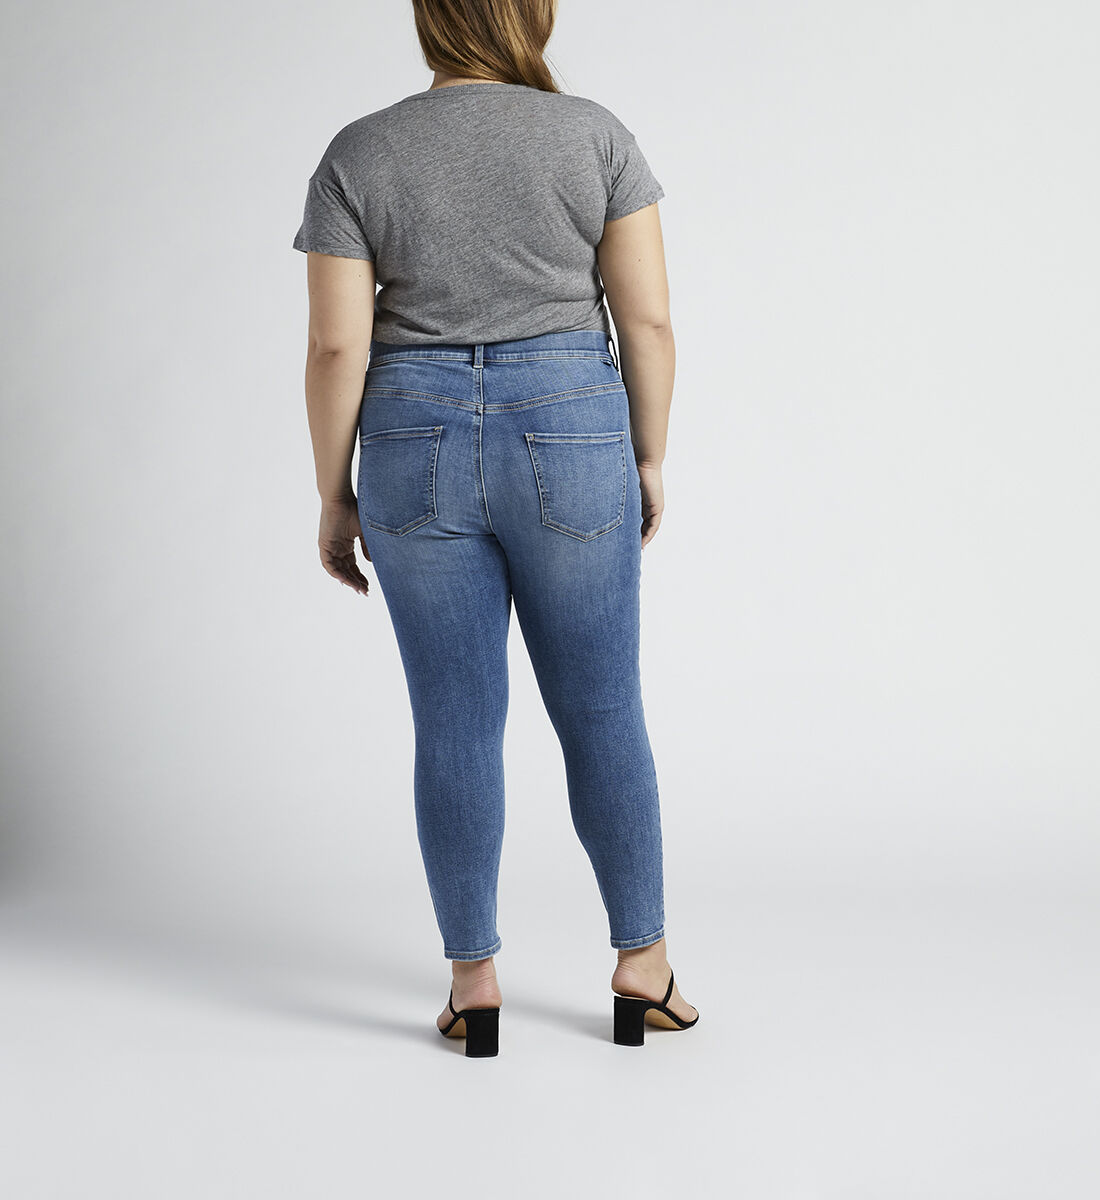 Valentina High Rise Skinny Crop Pull-On Jeans Plus Size Back